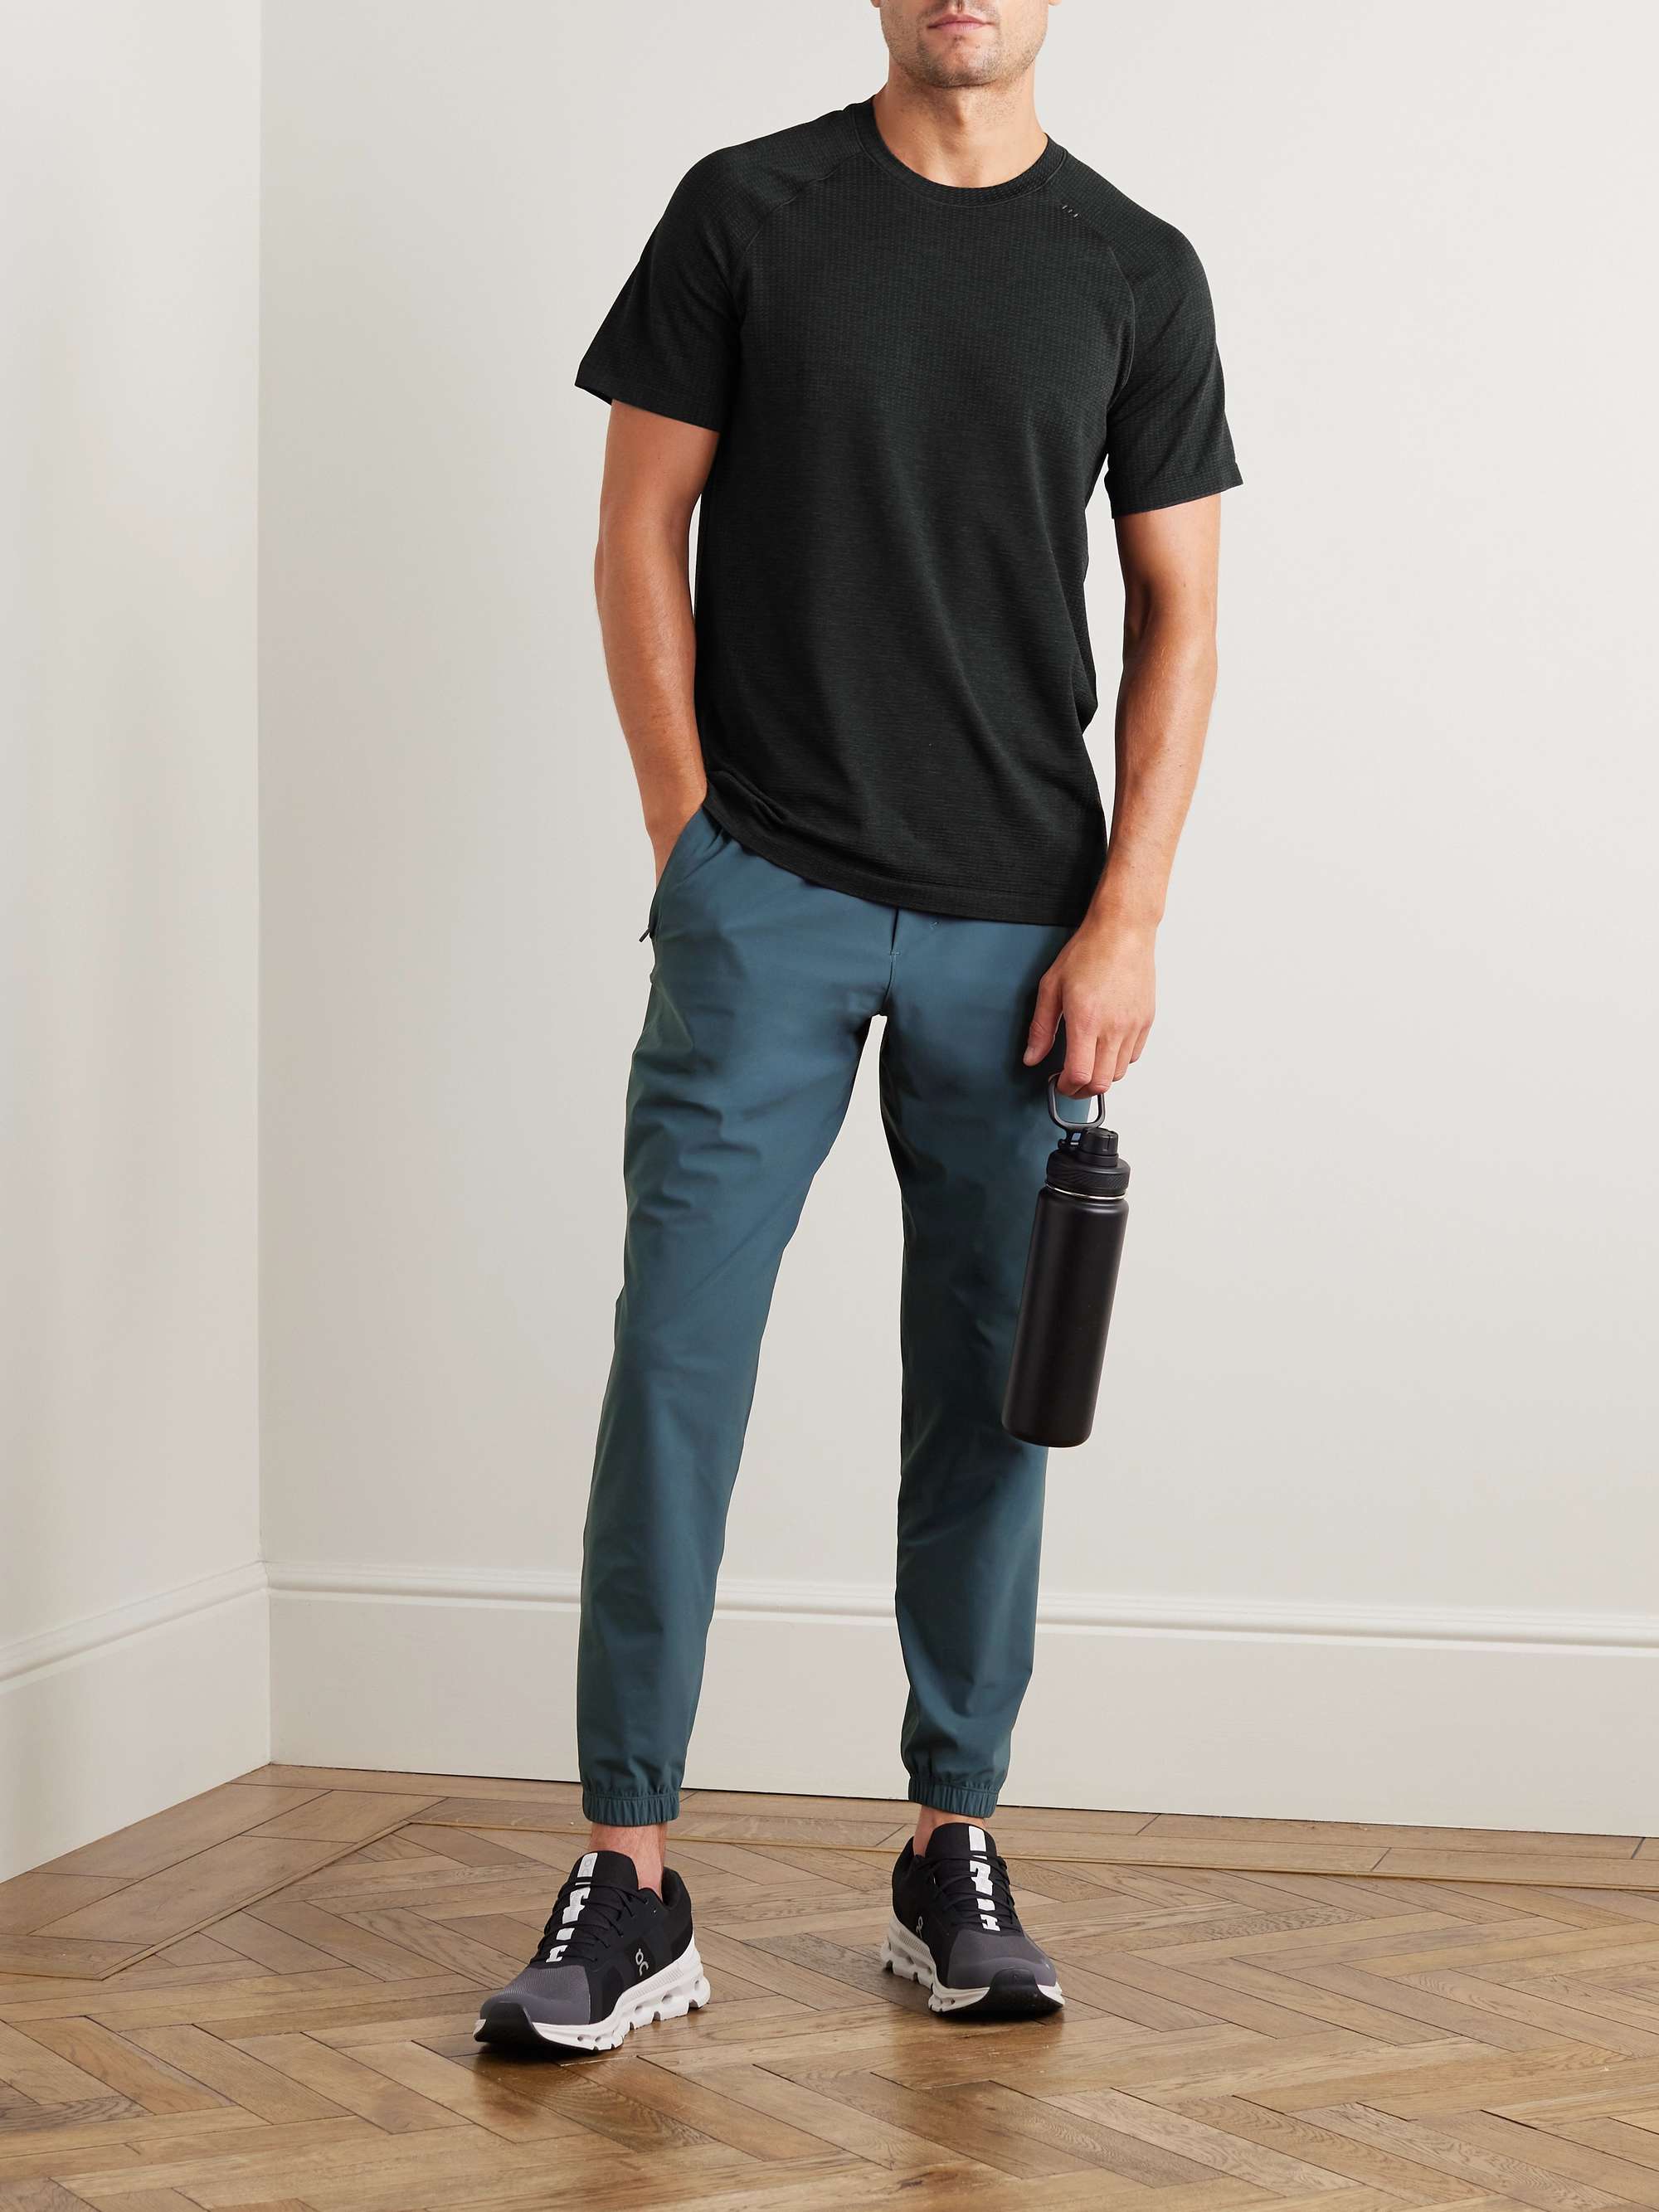 Review] Best high-end Joggers For Men : r/frugalmalefashion